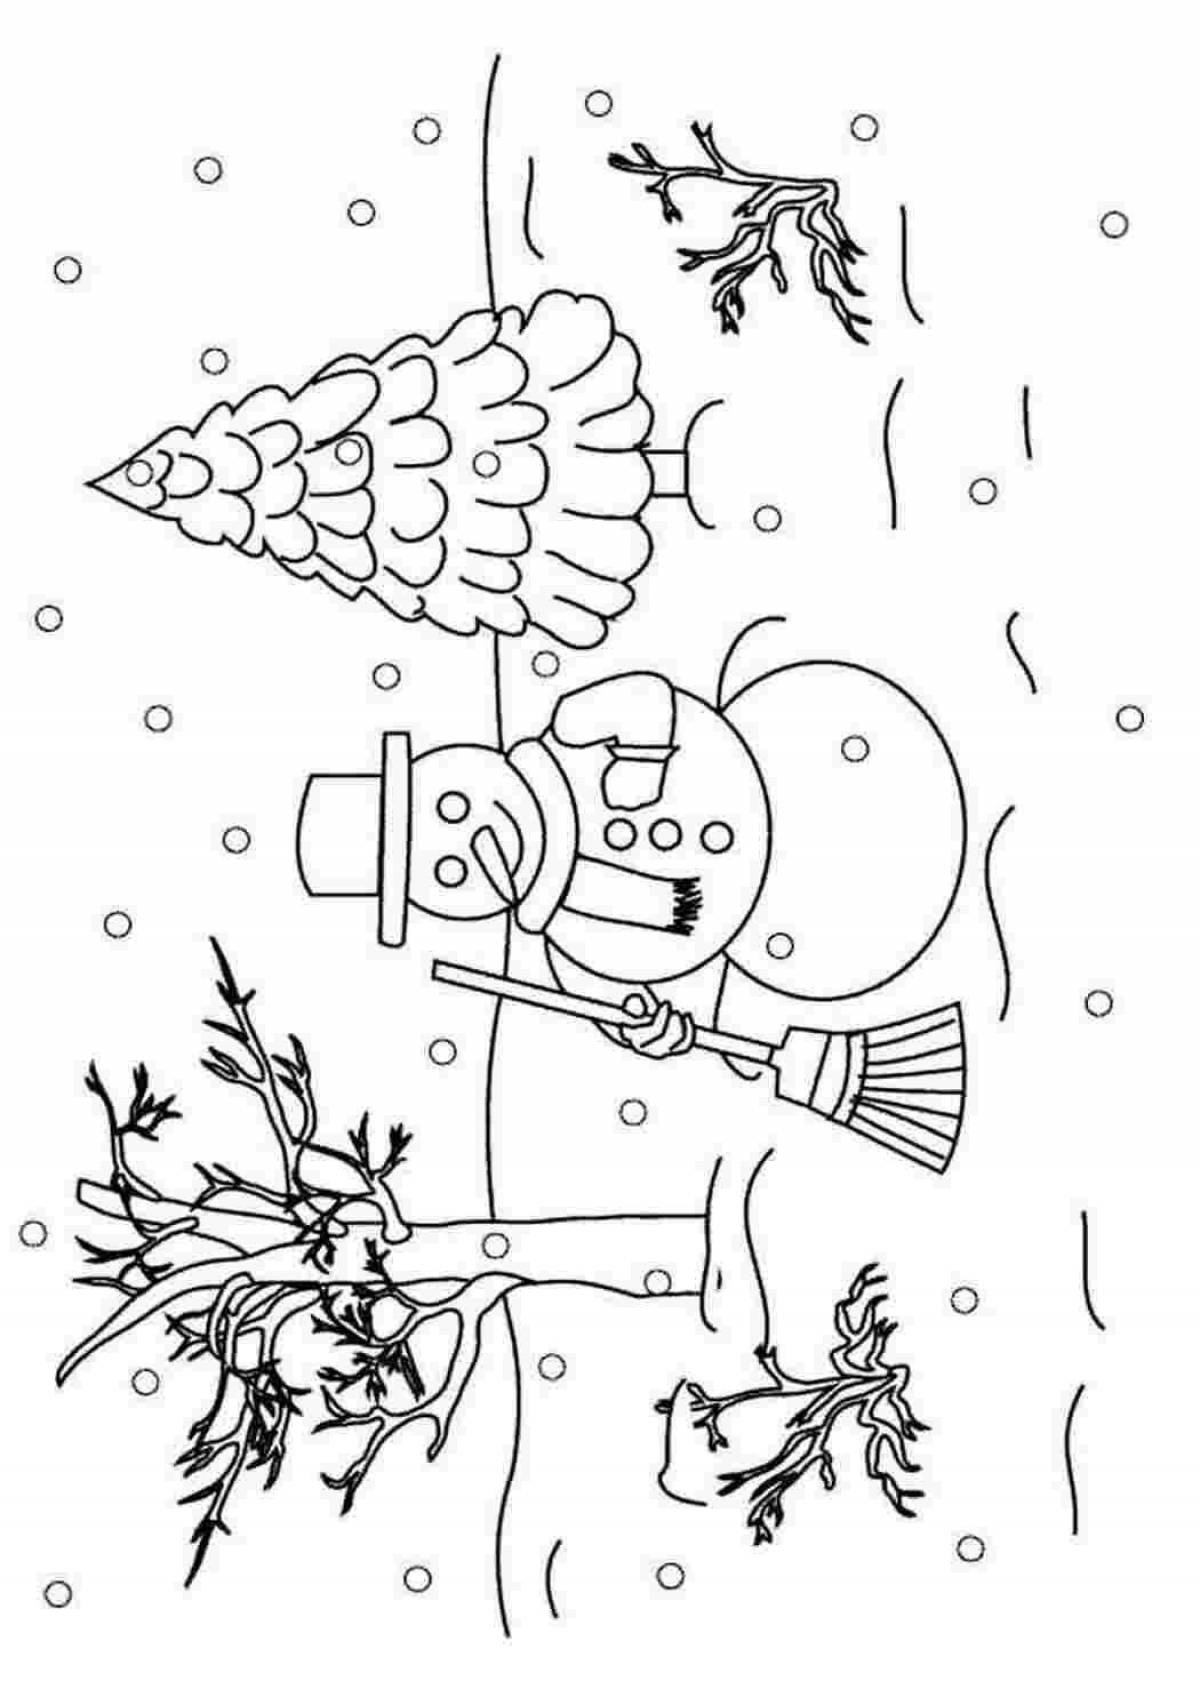 Colorful blizzard coloring book for kids